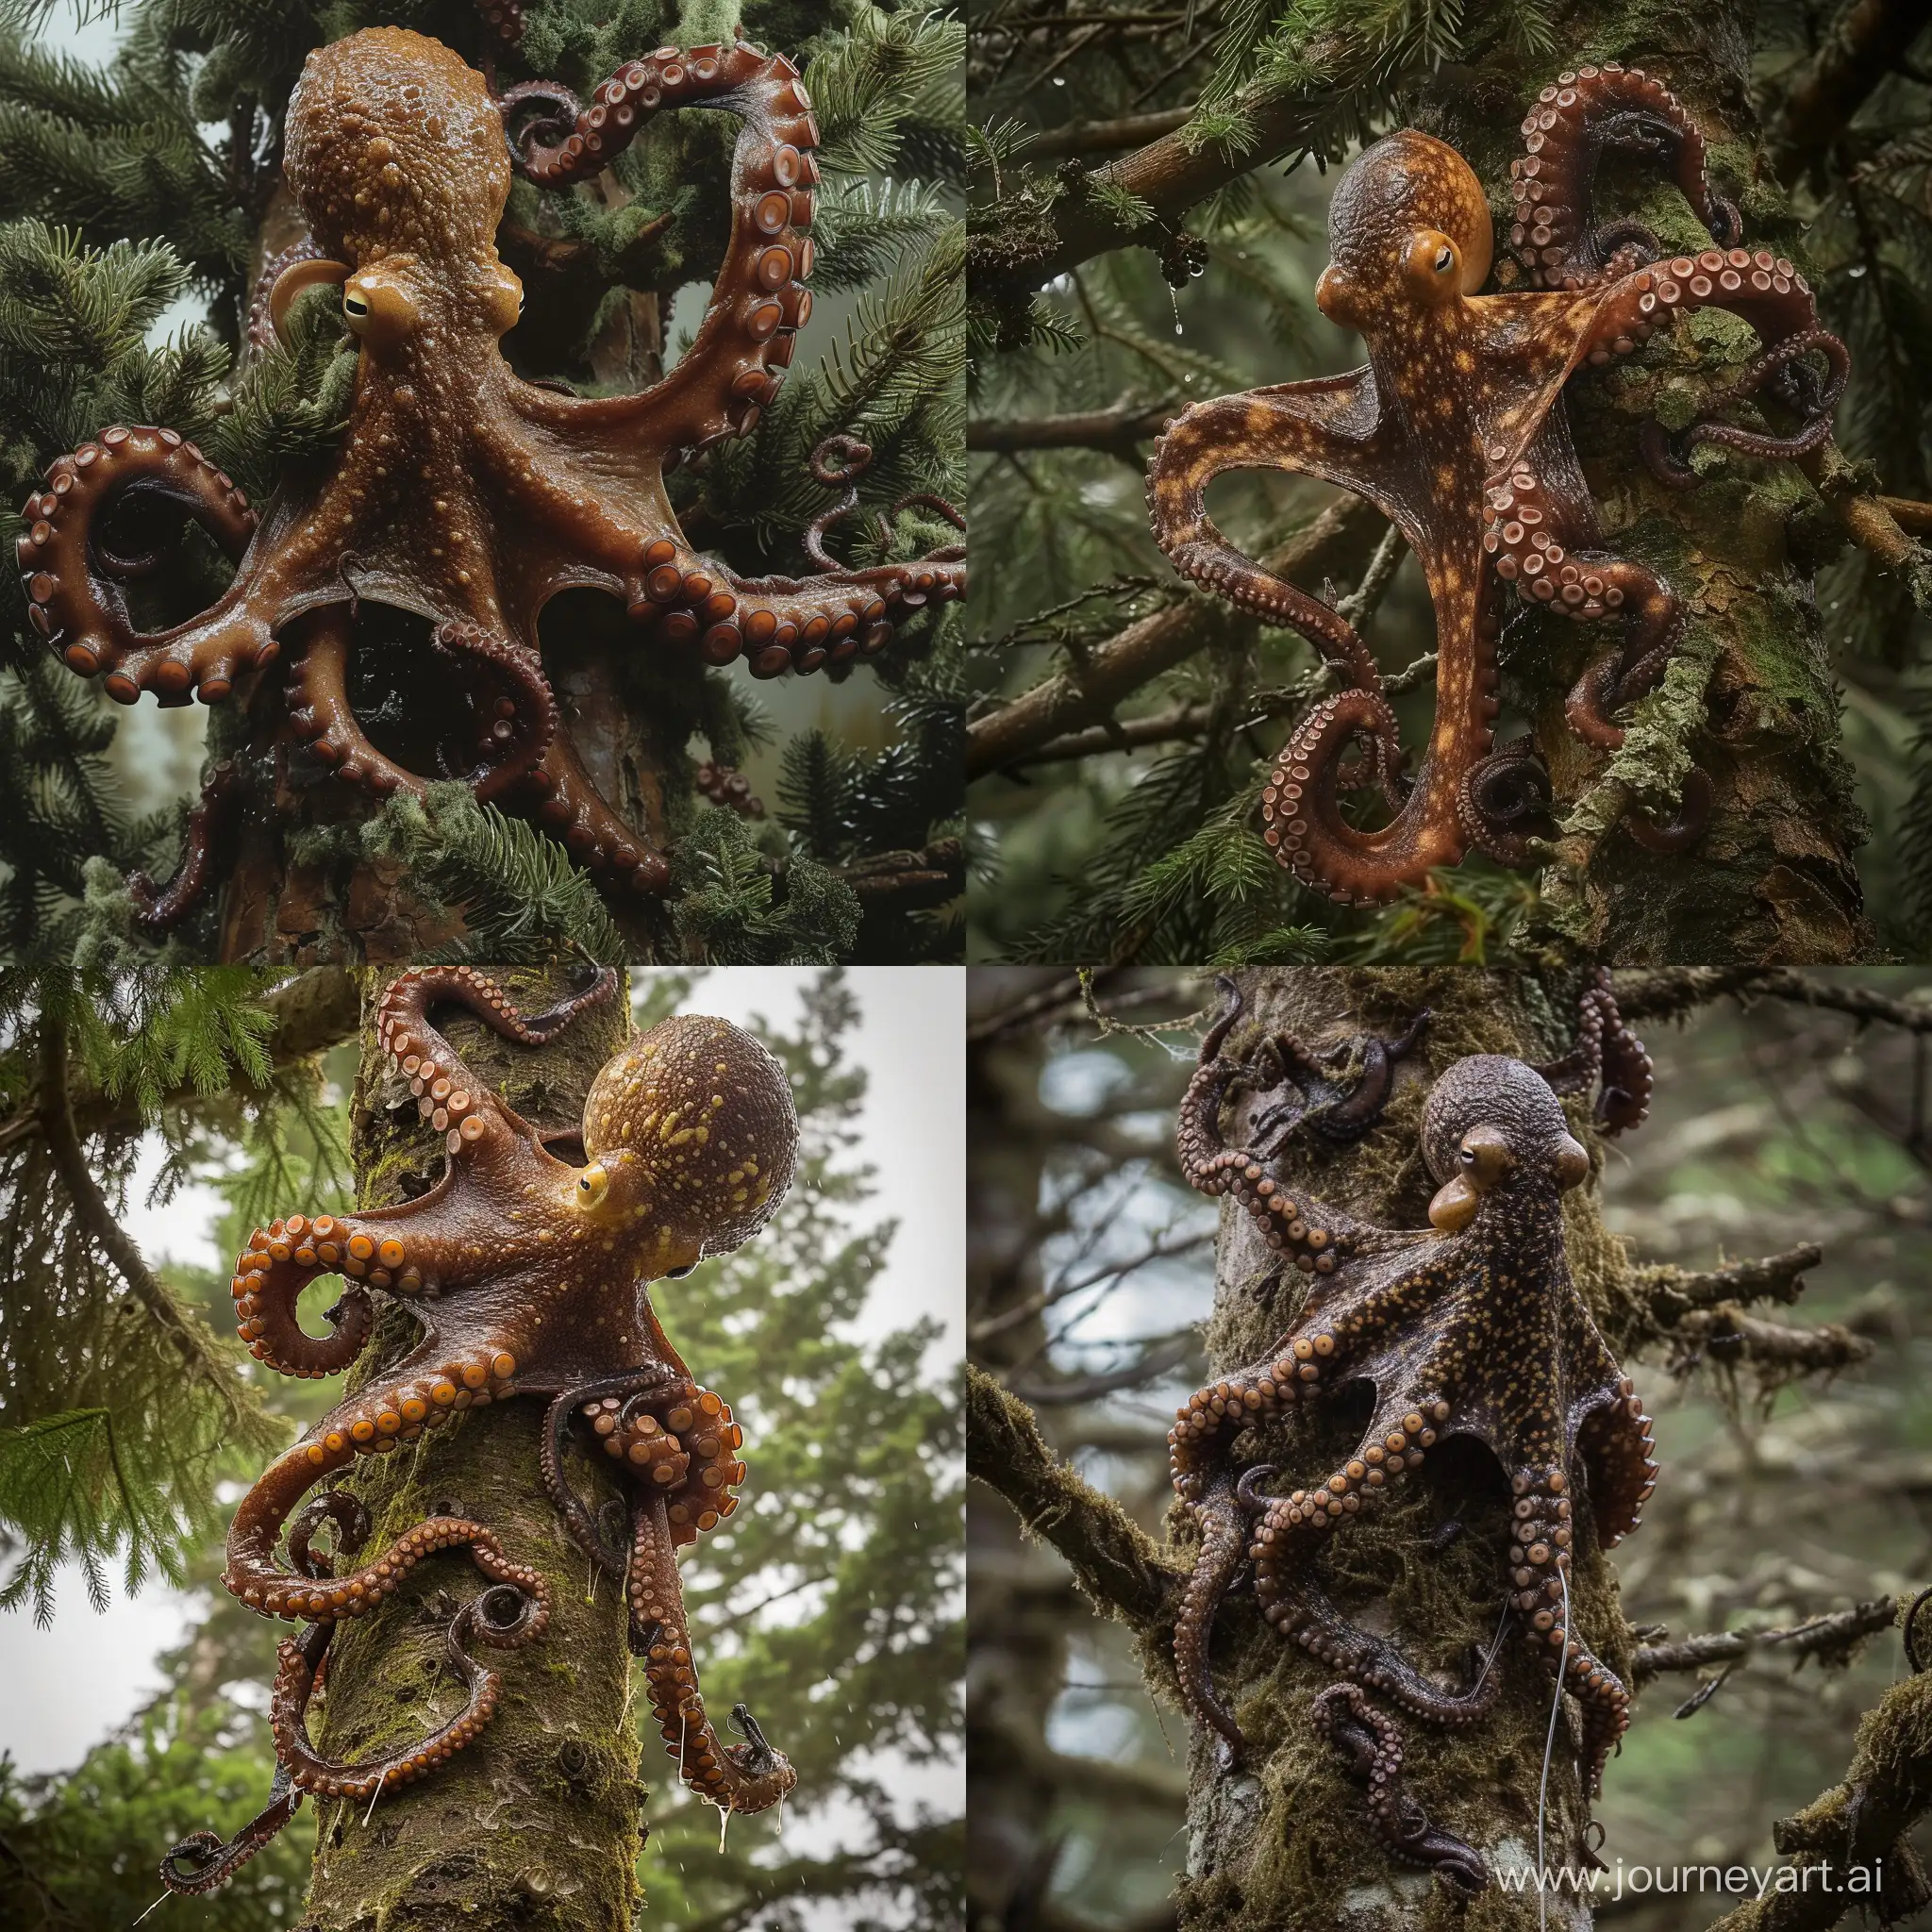 award winning wildlife photo of an wet mottled brown octopus scaling a large pine tree, grabbing branches with its tentacles, slime trail on the bark, temperate pine rainforest, daylight, telephoto lens, canon camera, wide shot, shot from below looking up, Frans Lanting, nature documentary